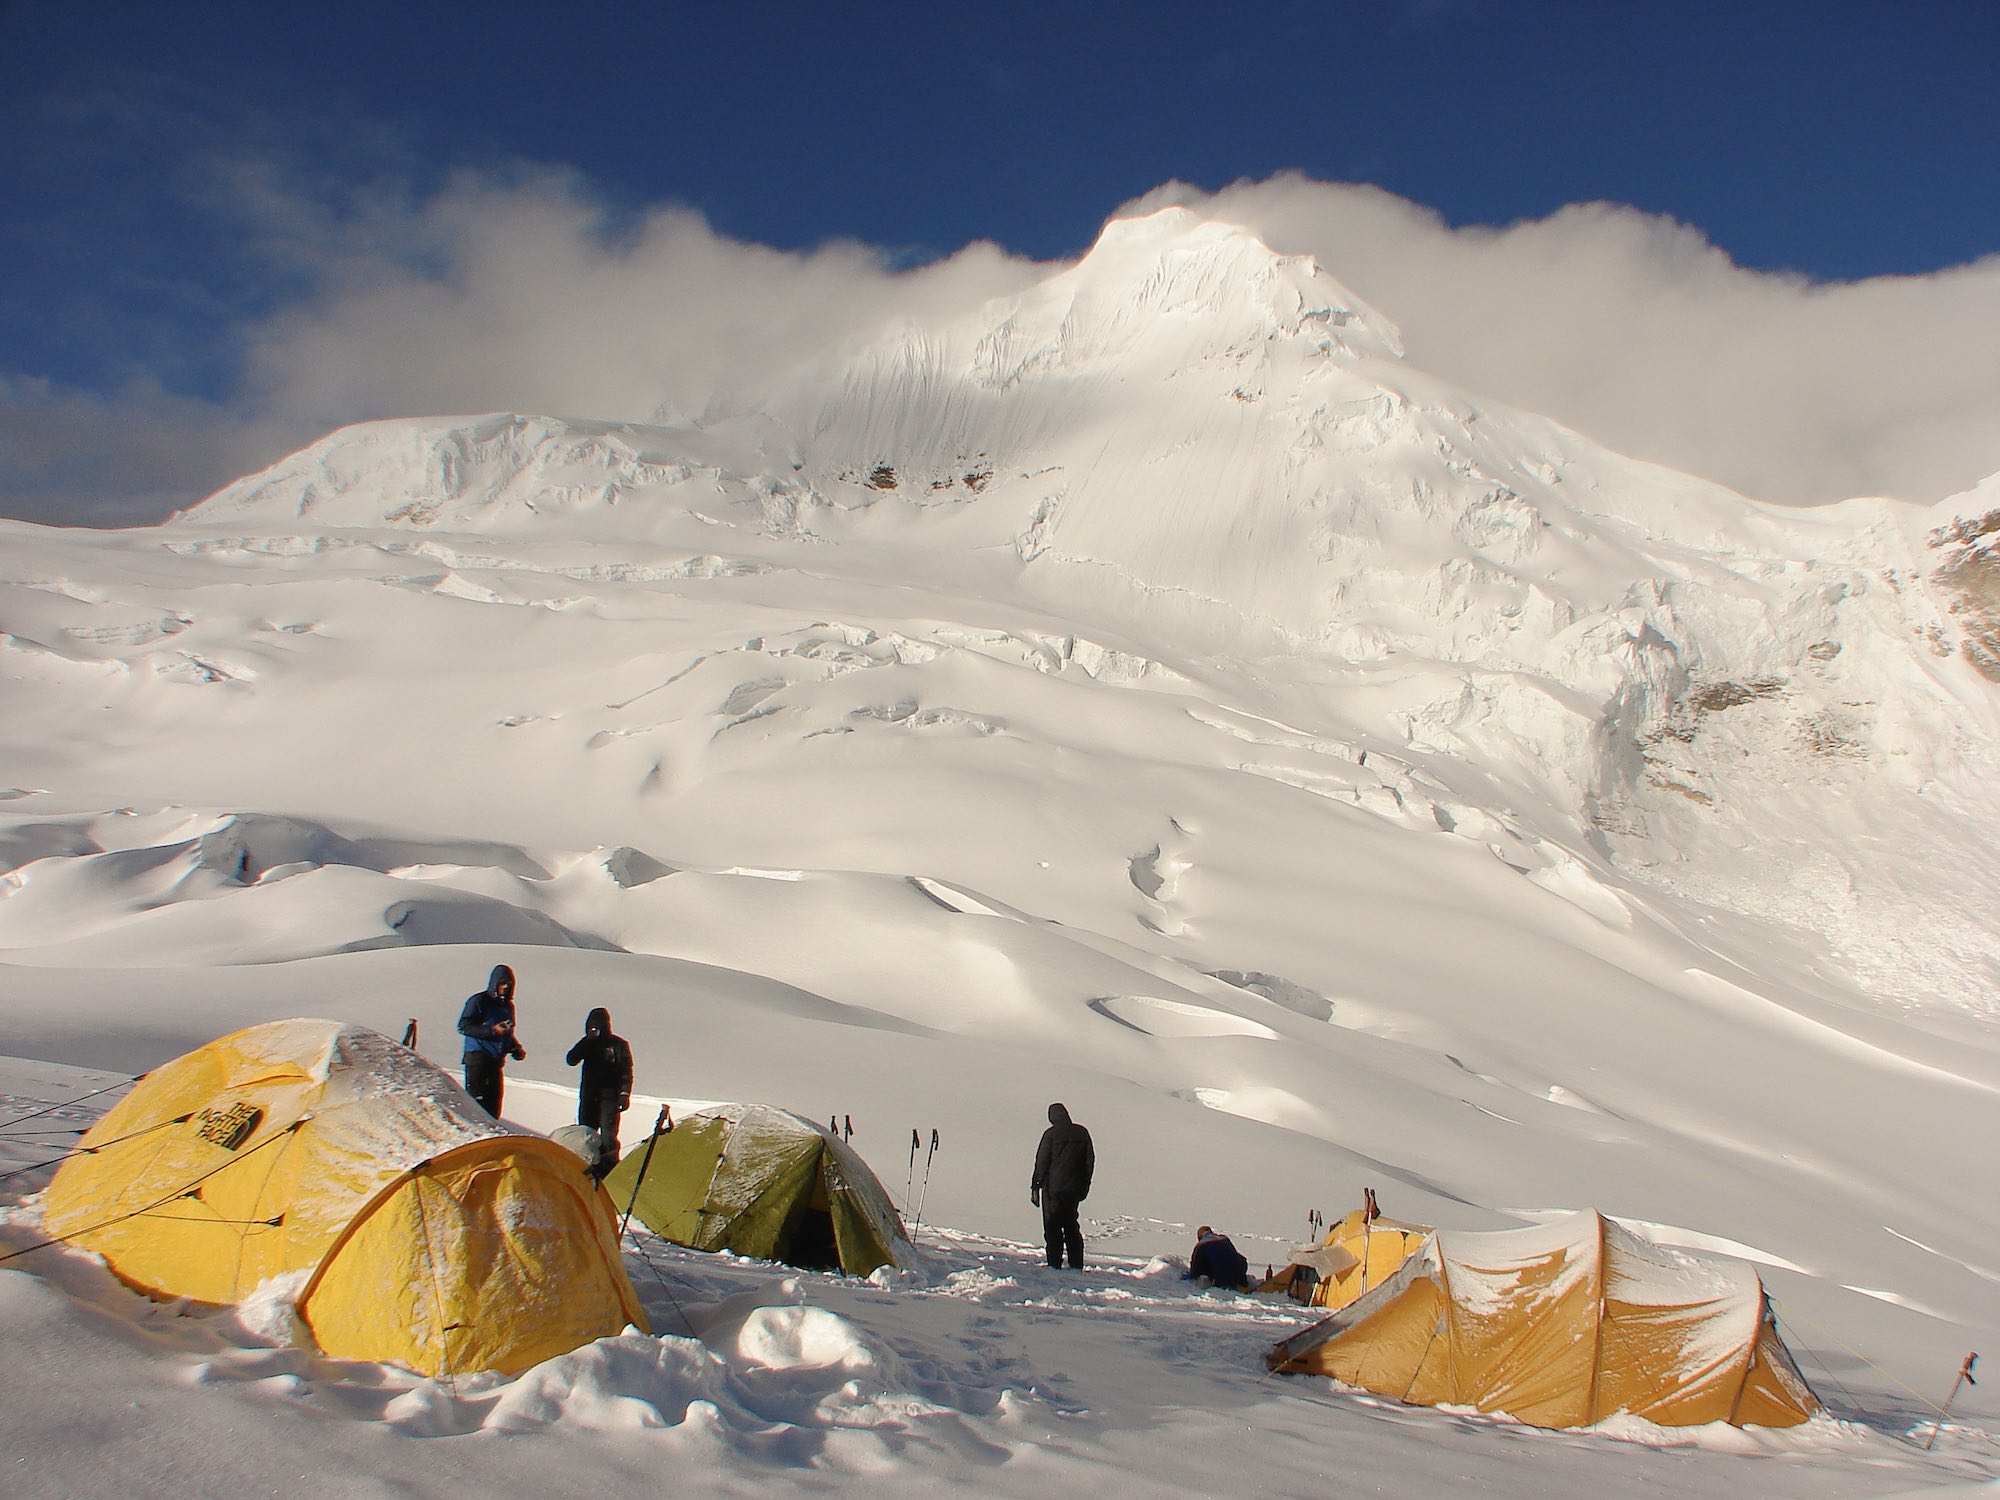 Tocllaraju climbers - Austrians on the left and our two tents on the right